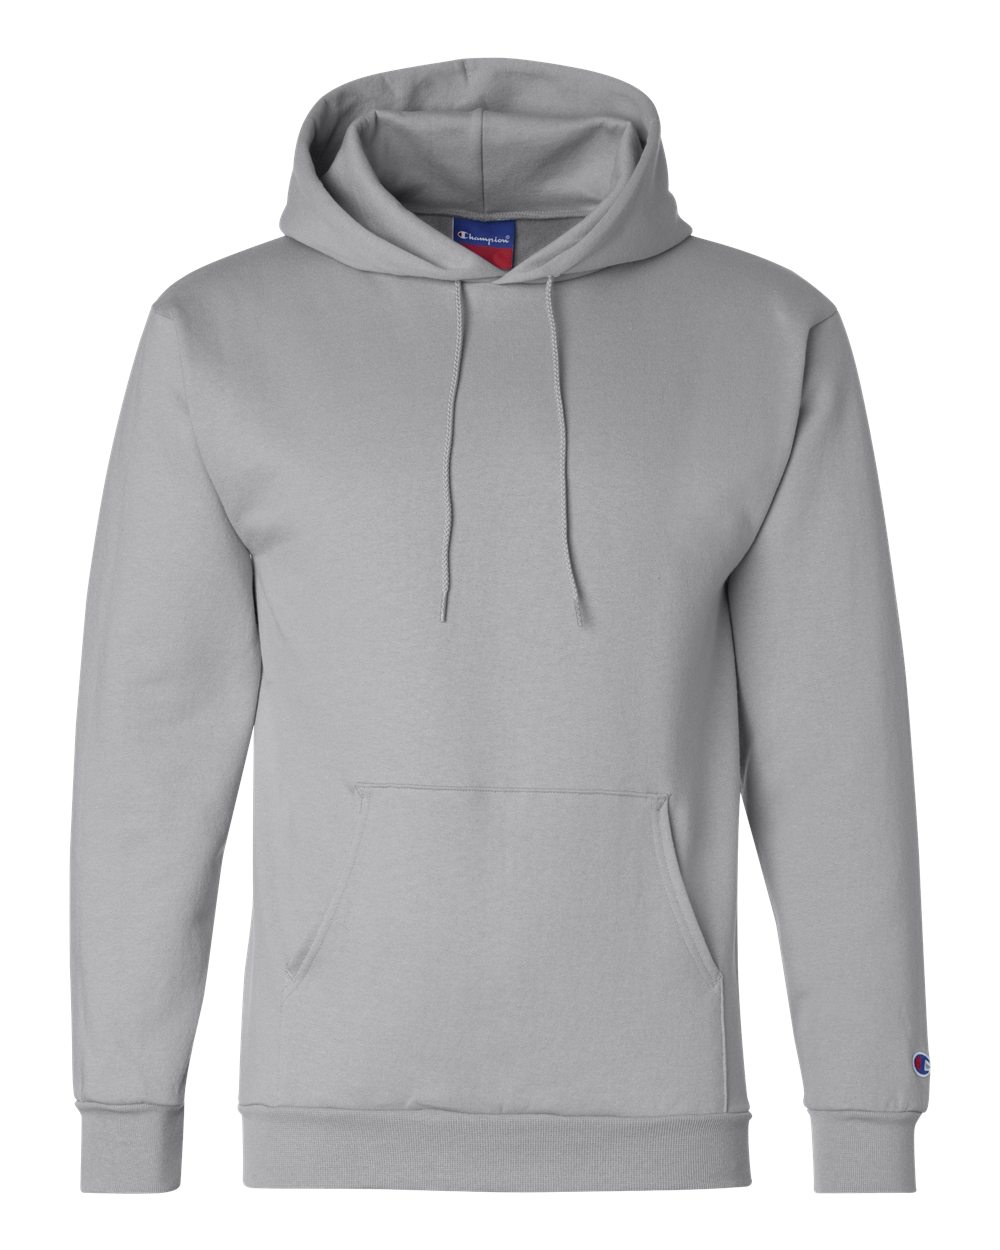 most expensive champion hoodie